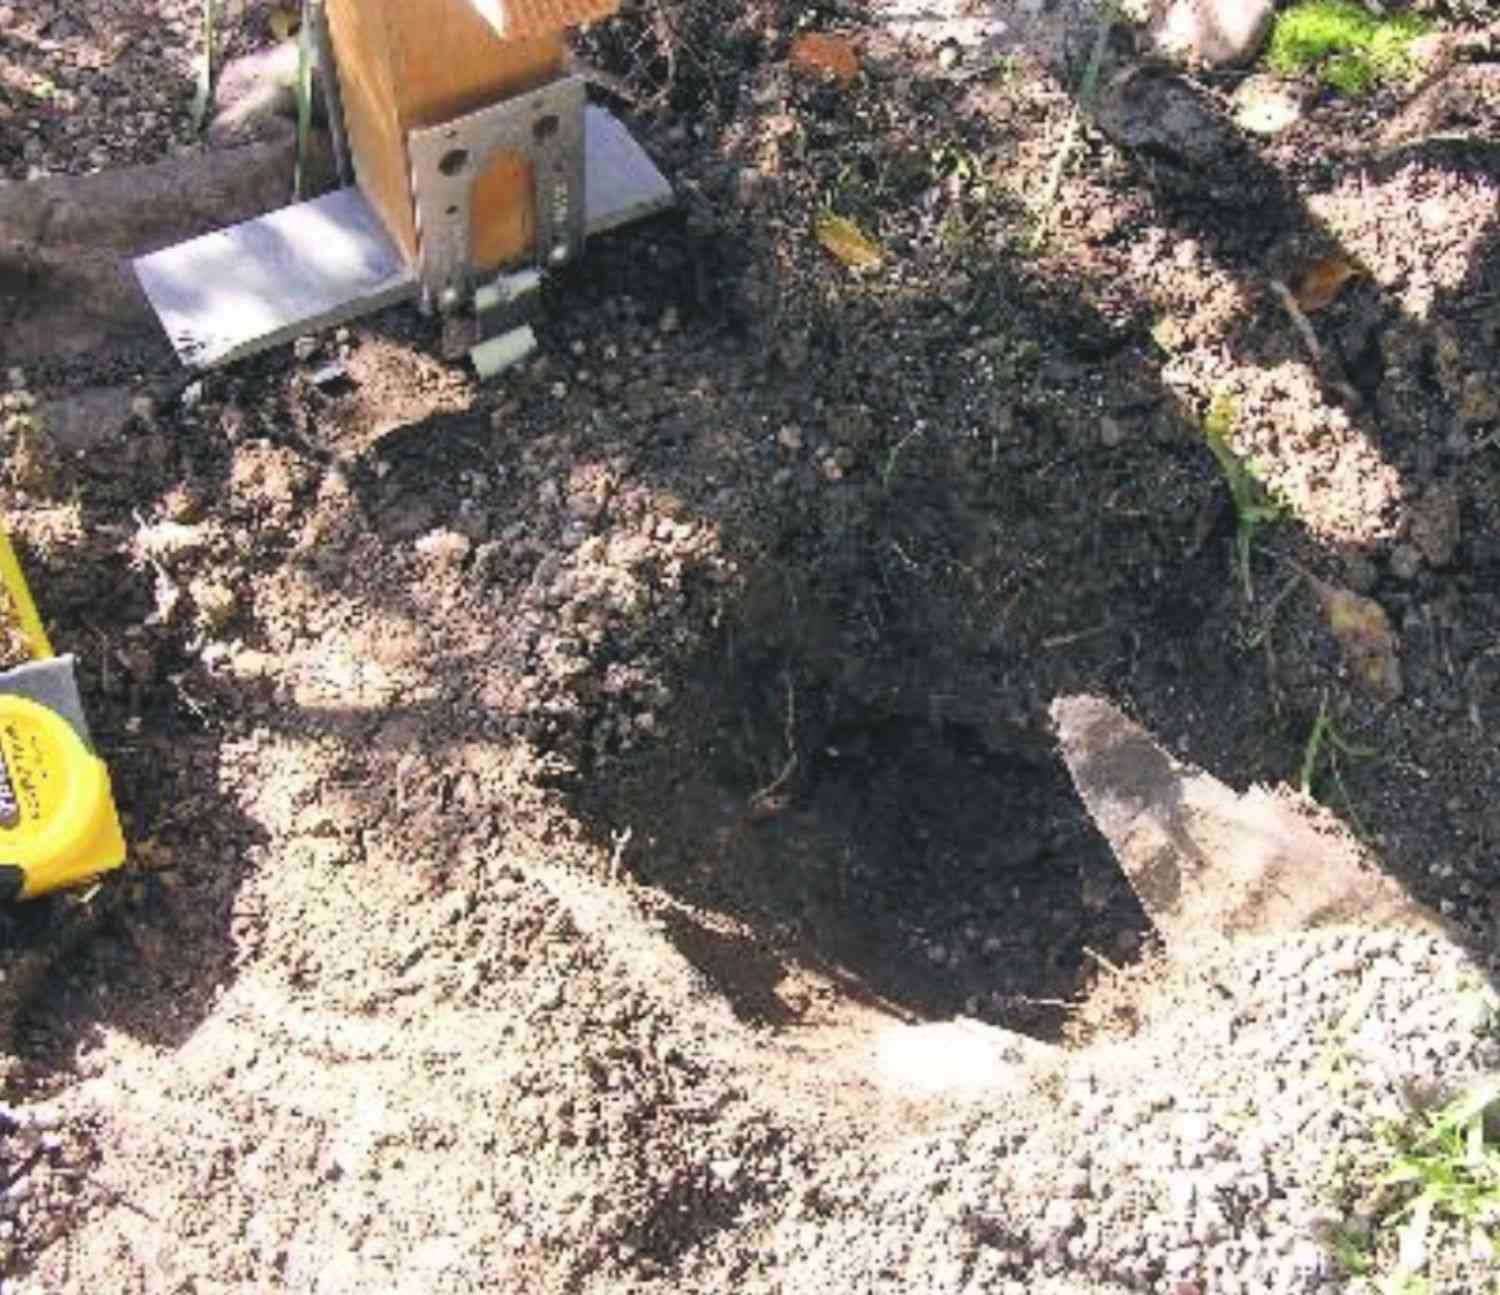 digging a post hole